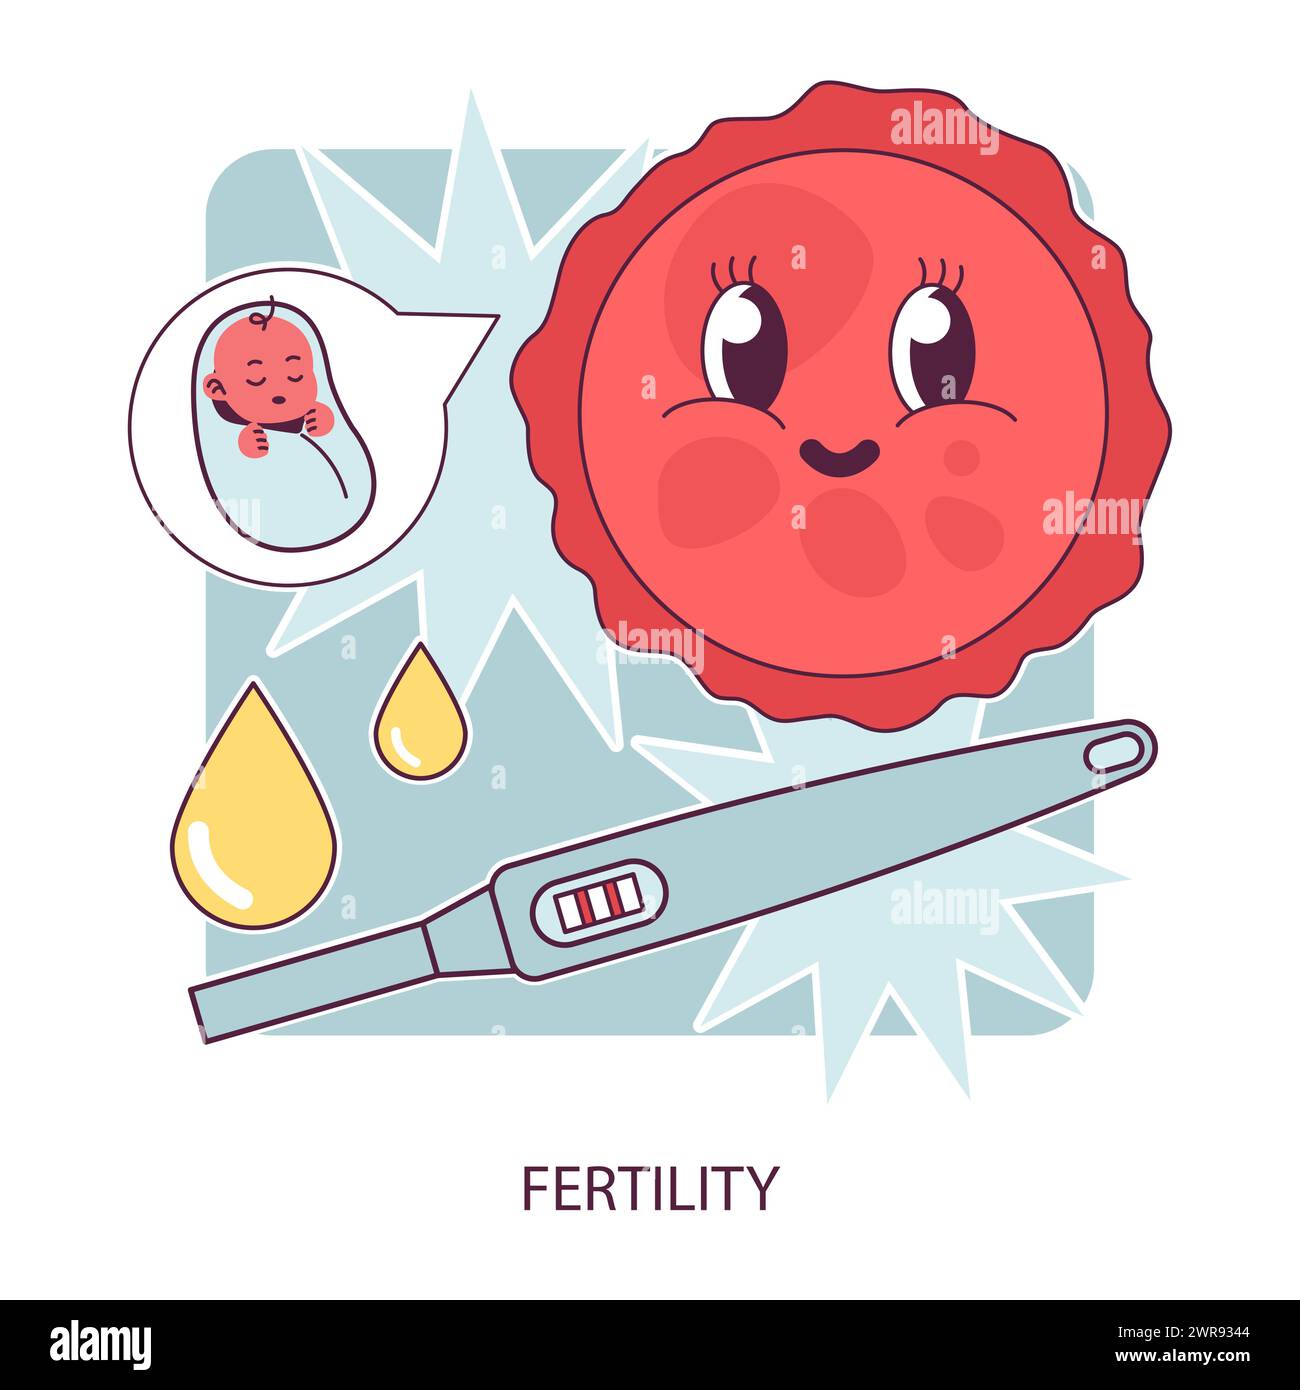 Fertility. Smiley ovum vintage cartoon character visualizes a baby. Positive pregnancy test expectation. Reproductive health, maternity and family planning. Flat vector illustration. Stock Vector